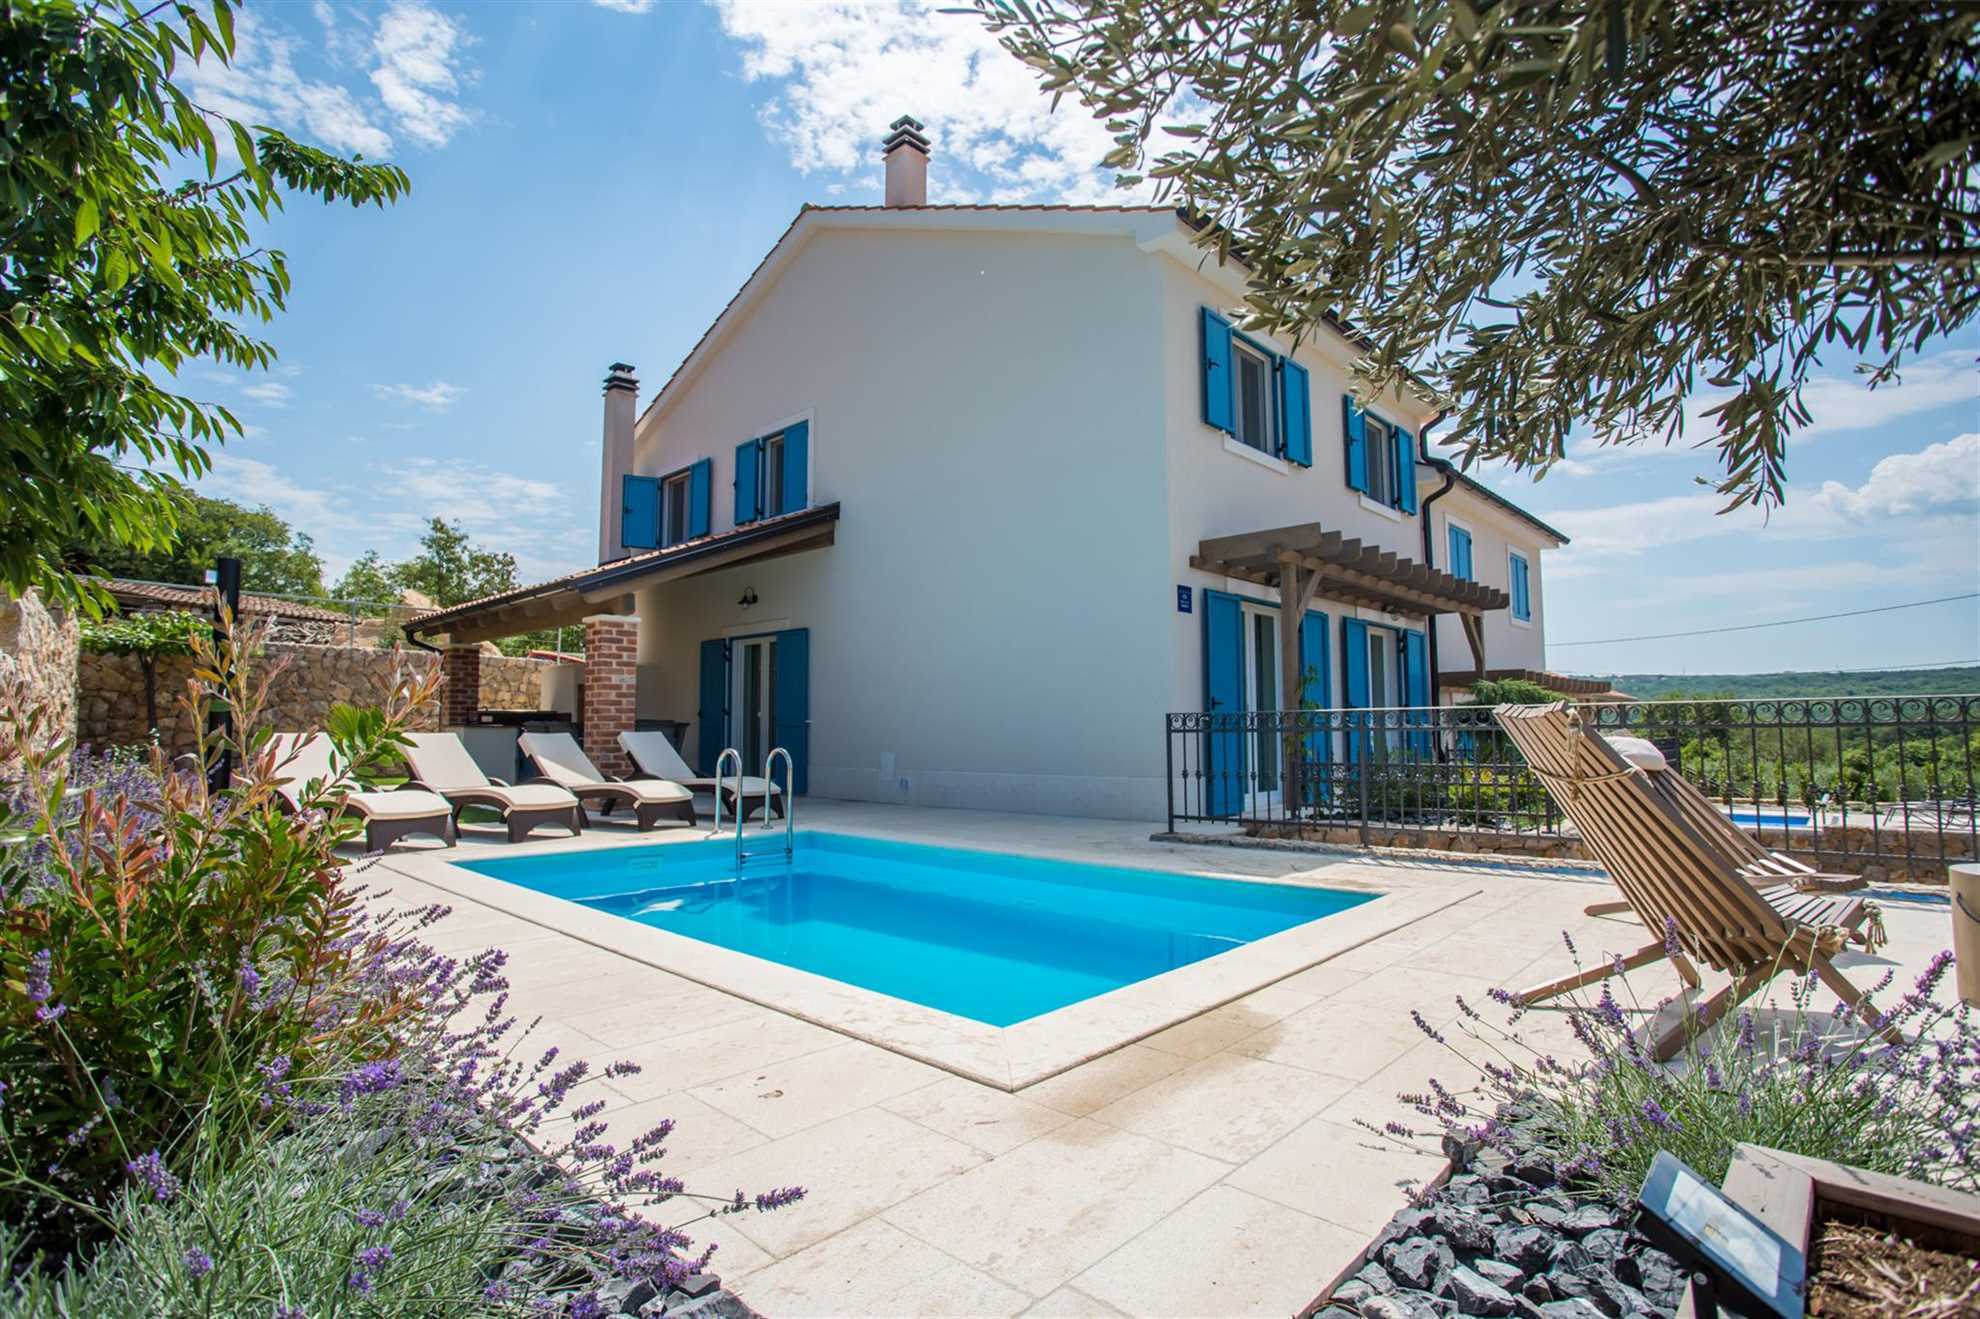 Villa Tana with a swimming pool, outdoor kitchen, BBQ & SUP